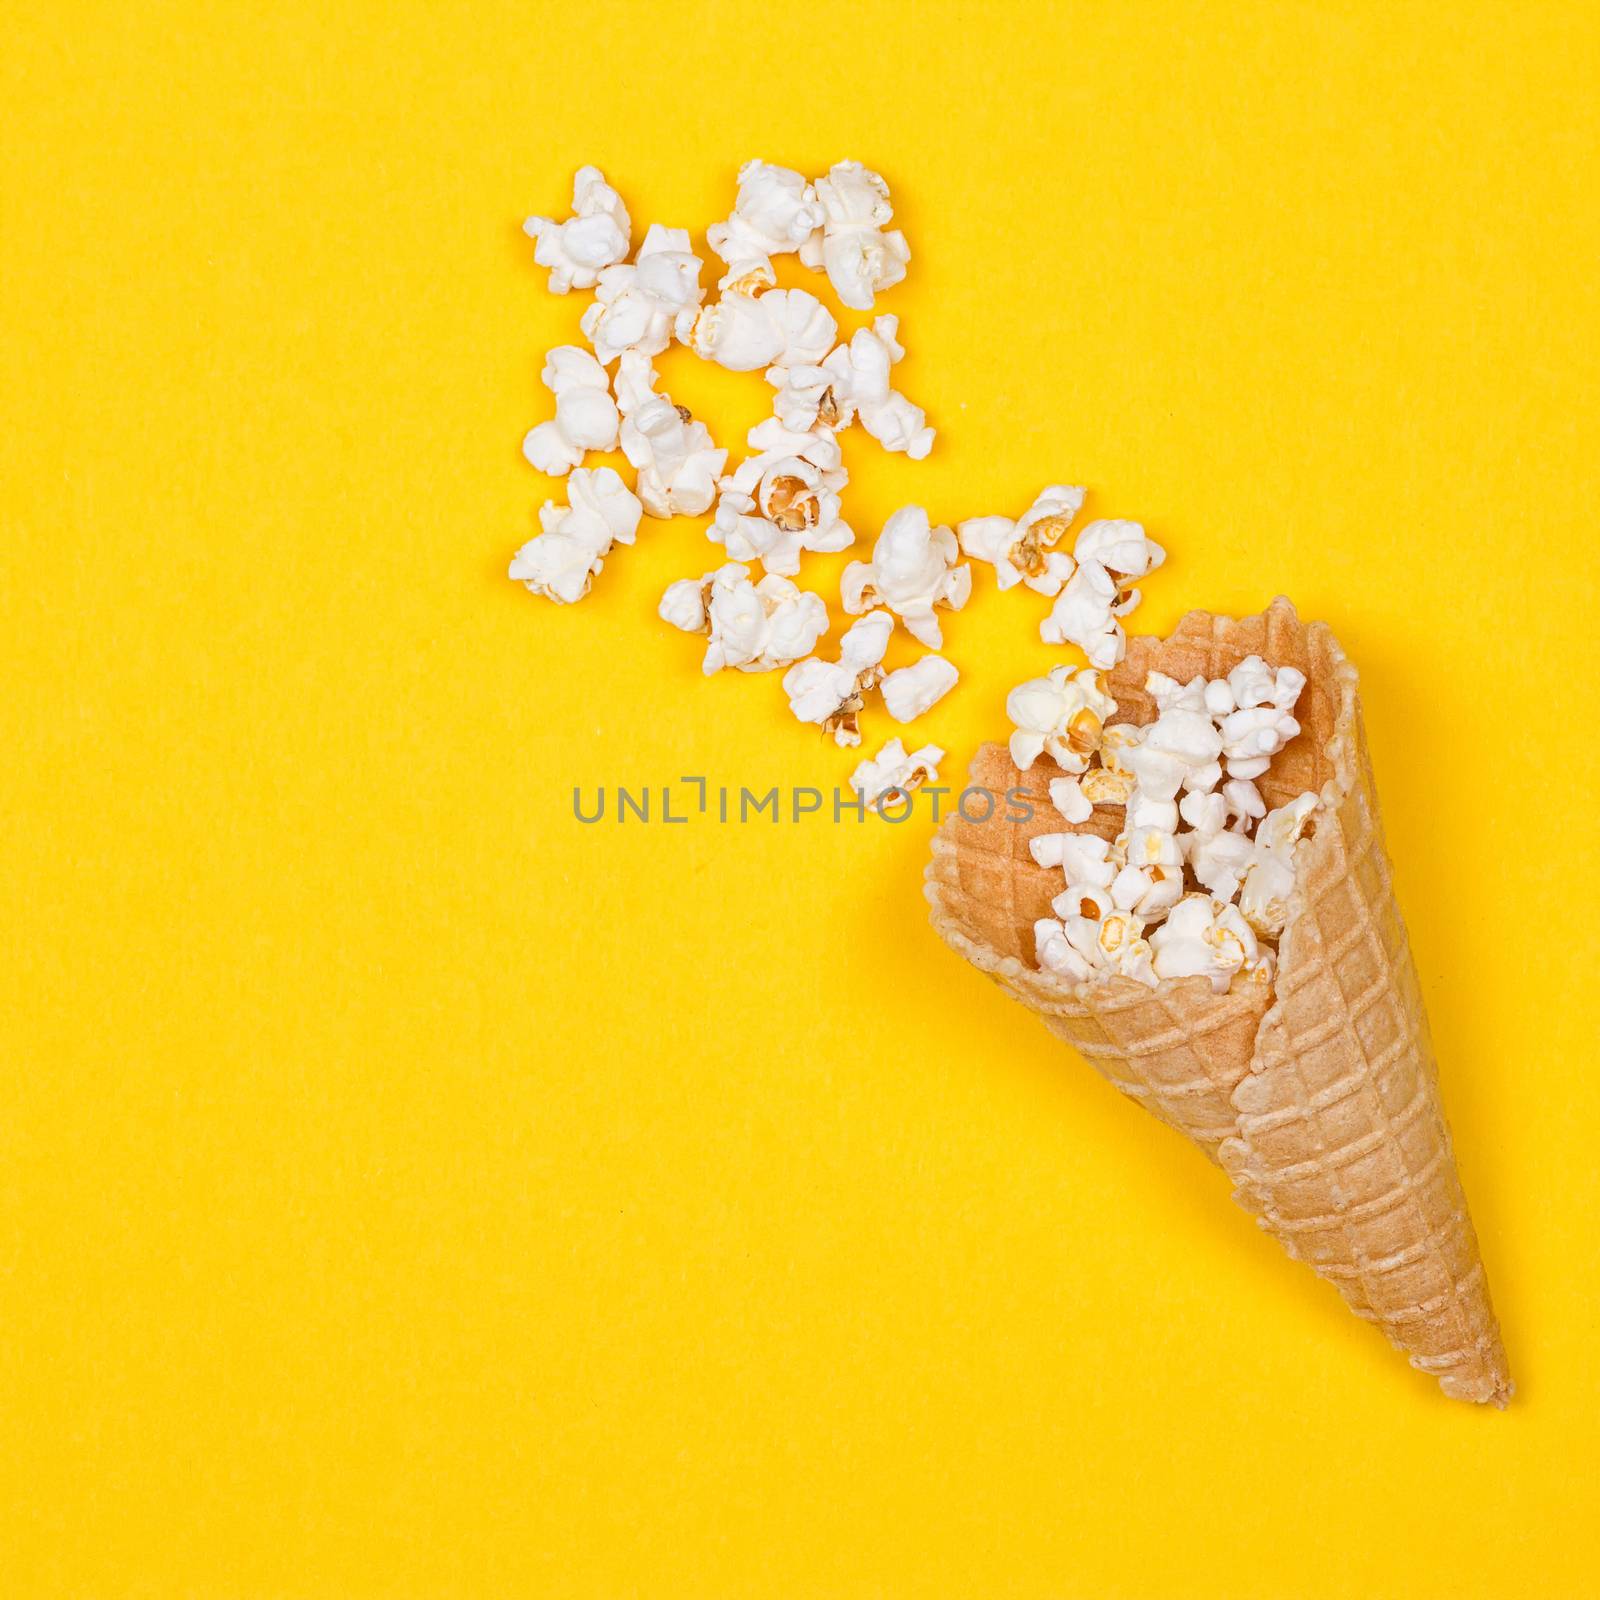 Popcorn in ice cream cones on yellow background. Top view.